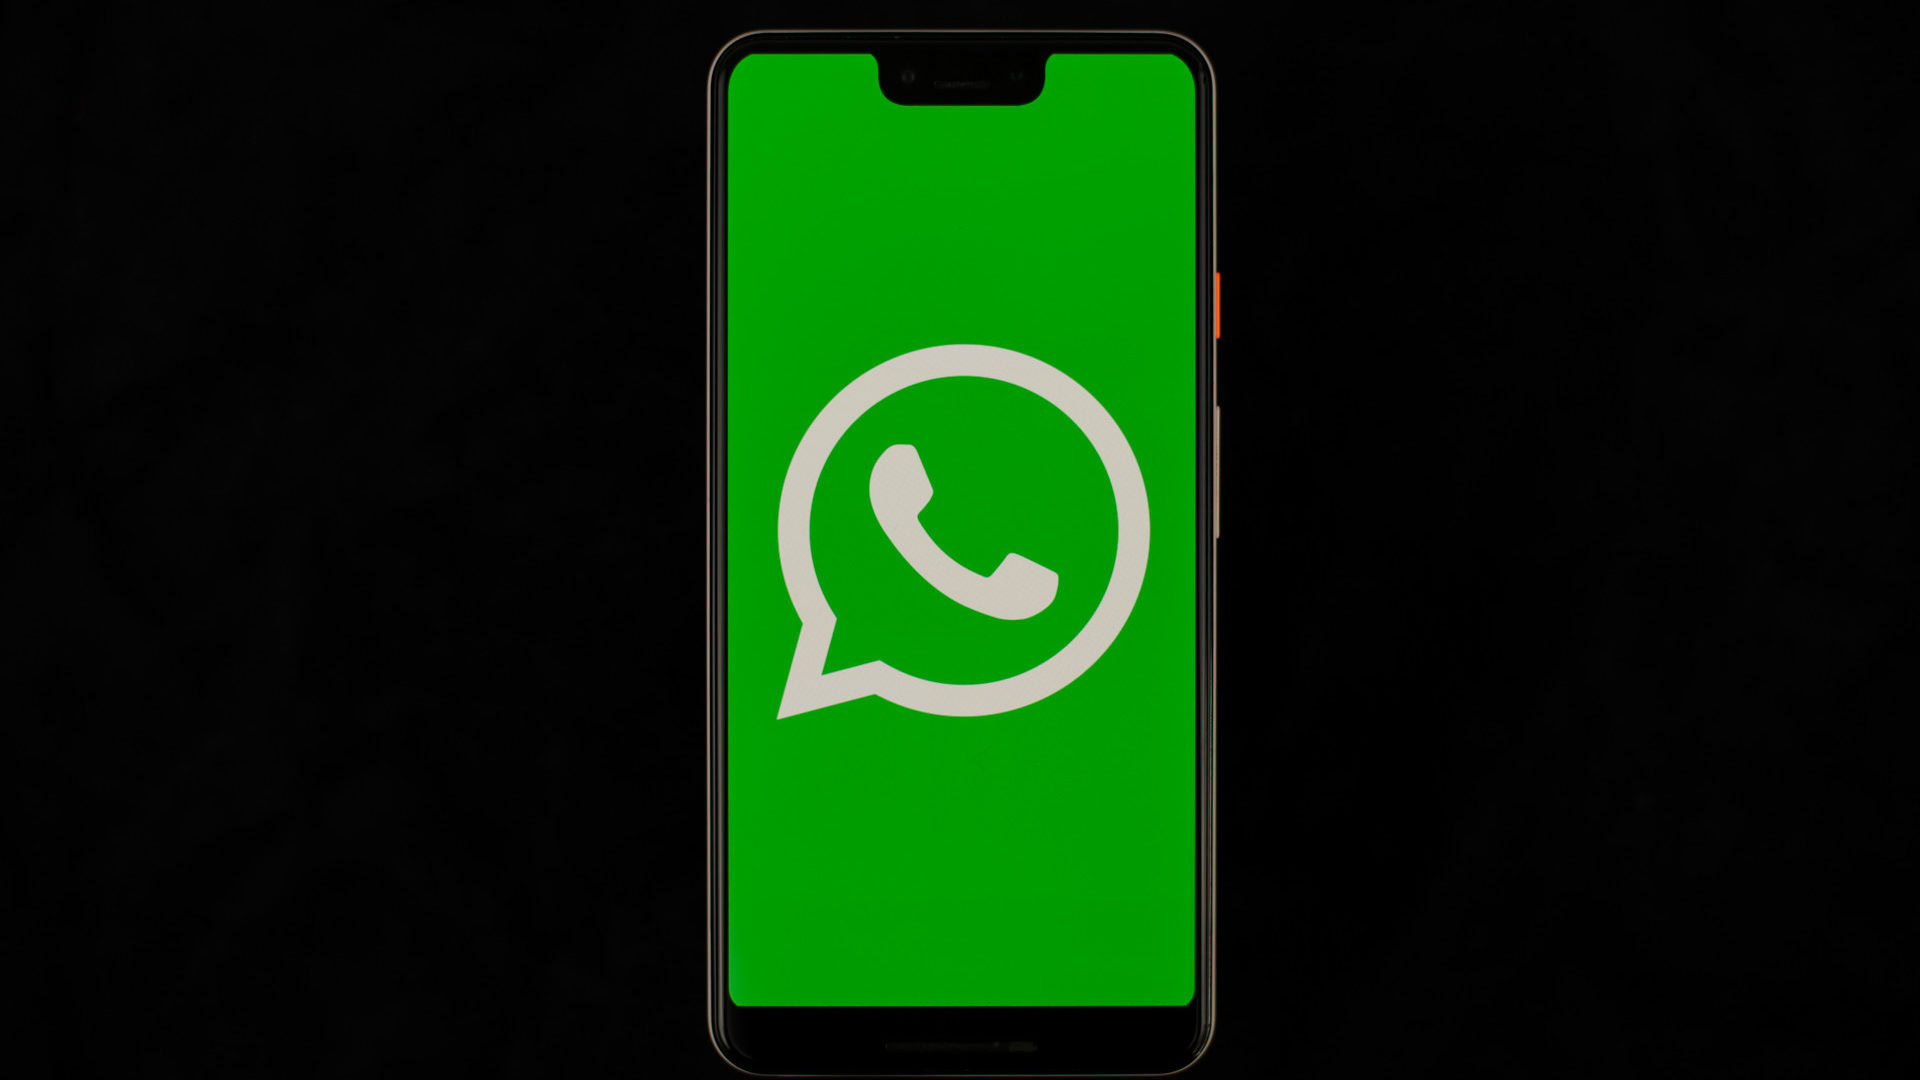 WhatsApp rolls out Navi payments integration for select US users